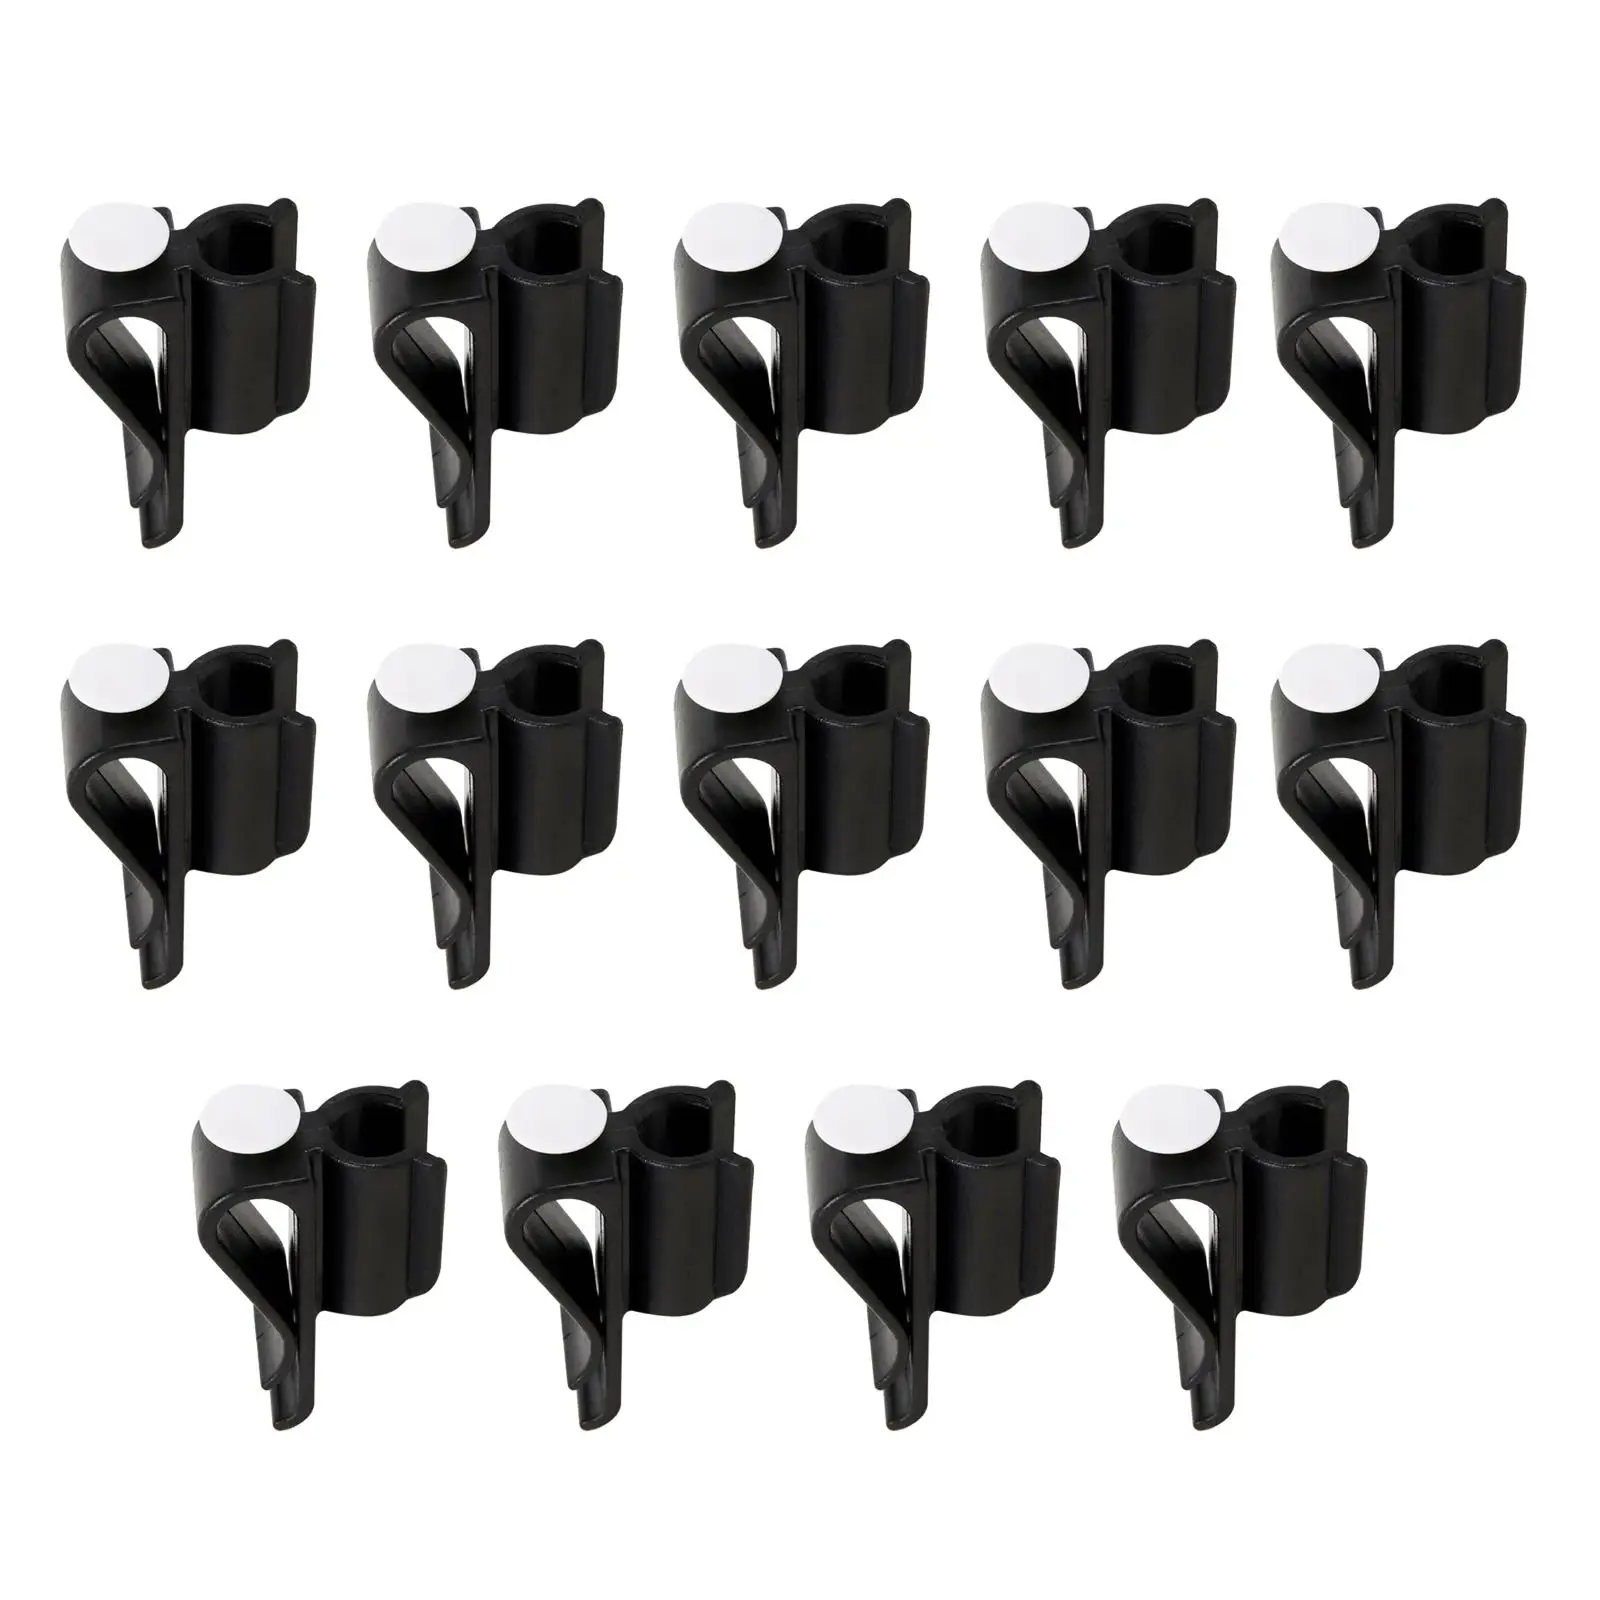 14pcs Sports Outdoor Portable Practical Clip On Fixed Putter Clamp Buckle Ball Marker Golf Bag Holder Club Grips Organizer